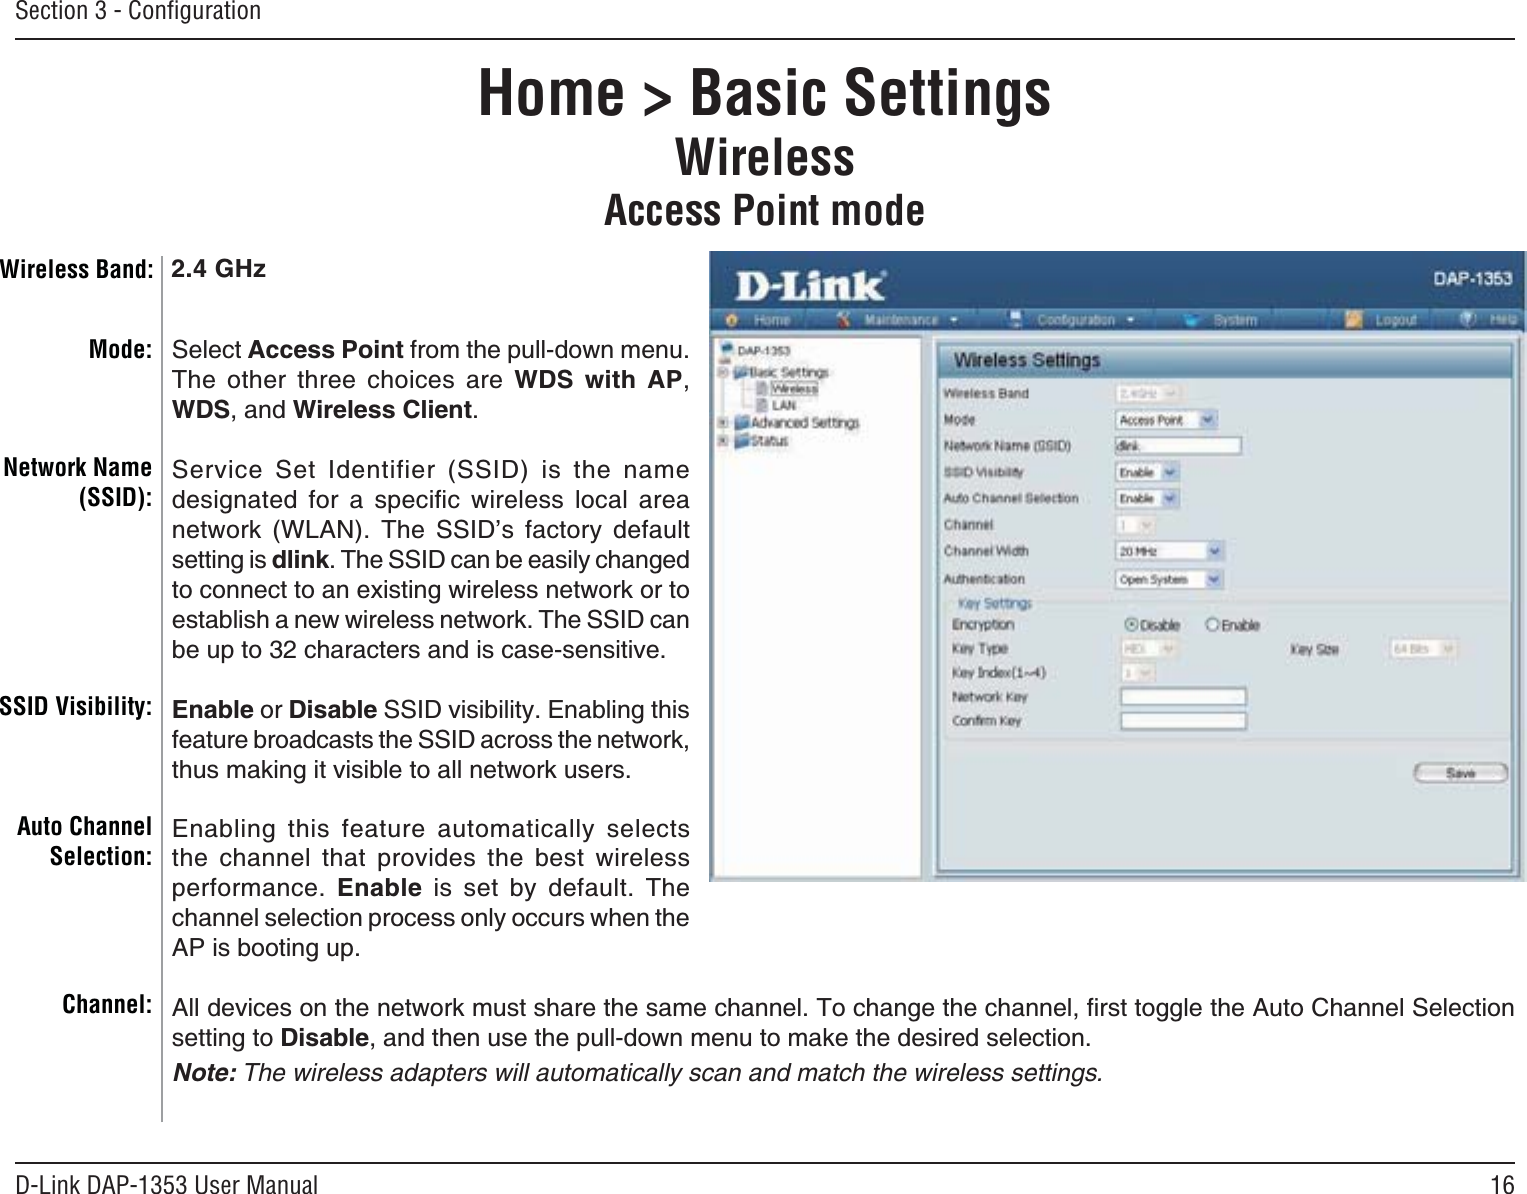 16D-Link DAP-1353 User ManualSection 3 - ConﬁgurationHome &gt; Basic SettingsWirelessAccess Point modeSelect Access Point from the pull-down menu. The other three choices are WDS with AP,WDS, and Wireless Client.5GTXKEG 5GV +FGPVKHKGT 55+&amp; KU VJG PCOGFGUKIPCVGF HQT C URGEKſE YKTGNGUU NQECN CTGCPGVYQTM 9.#0 6JG 55+&amp;ŏU HCEVQT[ FGHCWNVsetting is dlink6JG55+&amp;ECPDGGCUKN[EJCPIGFto connect to an existing wireless network or to GUVCDNKUJCPGYYKTGNGUUPGVYQTM6JG55+&amp;ECPDGWRVQEJCTCEVGTUCPFKUECUGUGPUKVKXGEnable or Disable55+&amp;XKUKDKNKV[&apos;PCDNKPIVJKUHGCVWTGDTQCFECUVUVJG55+&amp;CETQUUVJGPGVYQTMVJWUOCMKPIKVXKUKDNGVQCNNPGVYQTMWUGTU&apos;PCDNKPI VJKU HGCVWTG CWVQOCVKECNN[ UGNGEVUVJG EJCPPGN VJCV RTQXKFGU VJG DGUV YKTGNGUUperformance. Enable KU UGV D[ FGHCWNV 6JGchannel selection process only occurs when the #2KUDQQVKPIWR#NNFGXKEGUQPVJGPGVYQTMOWUVUJCTGVJGUCOGEJCPPGN6QEJCPIGVJGEJCPPGNſTUVVQIINGVJG#WVQ%JCPPGN5GNGEVKQPsetting to Disable, and then use the pull-down menu to make the desired selection. Note: The wireless adapters will automatically scan and match the wireless settings.Mode:Network Name (SSID):SSID Visibility:Auto Channel Selection:Channel:Wireless Band: 2.4 GHz